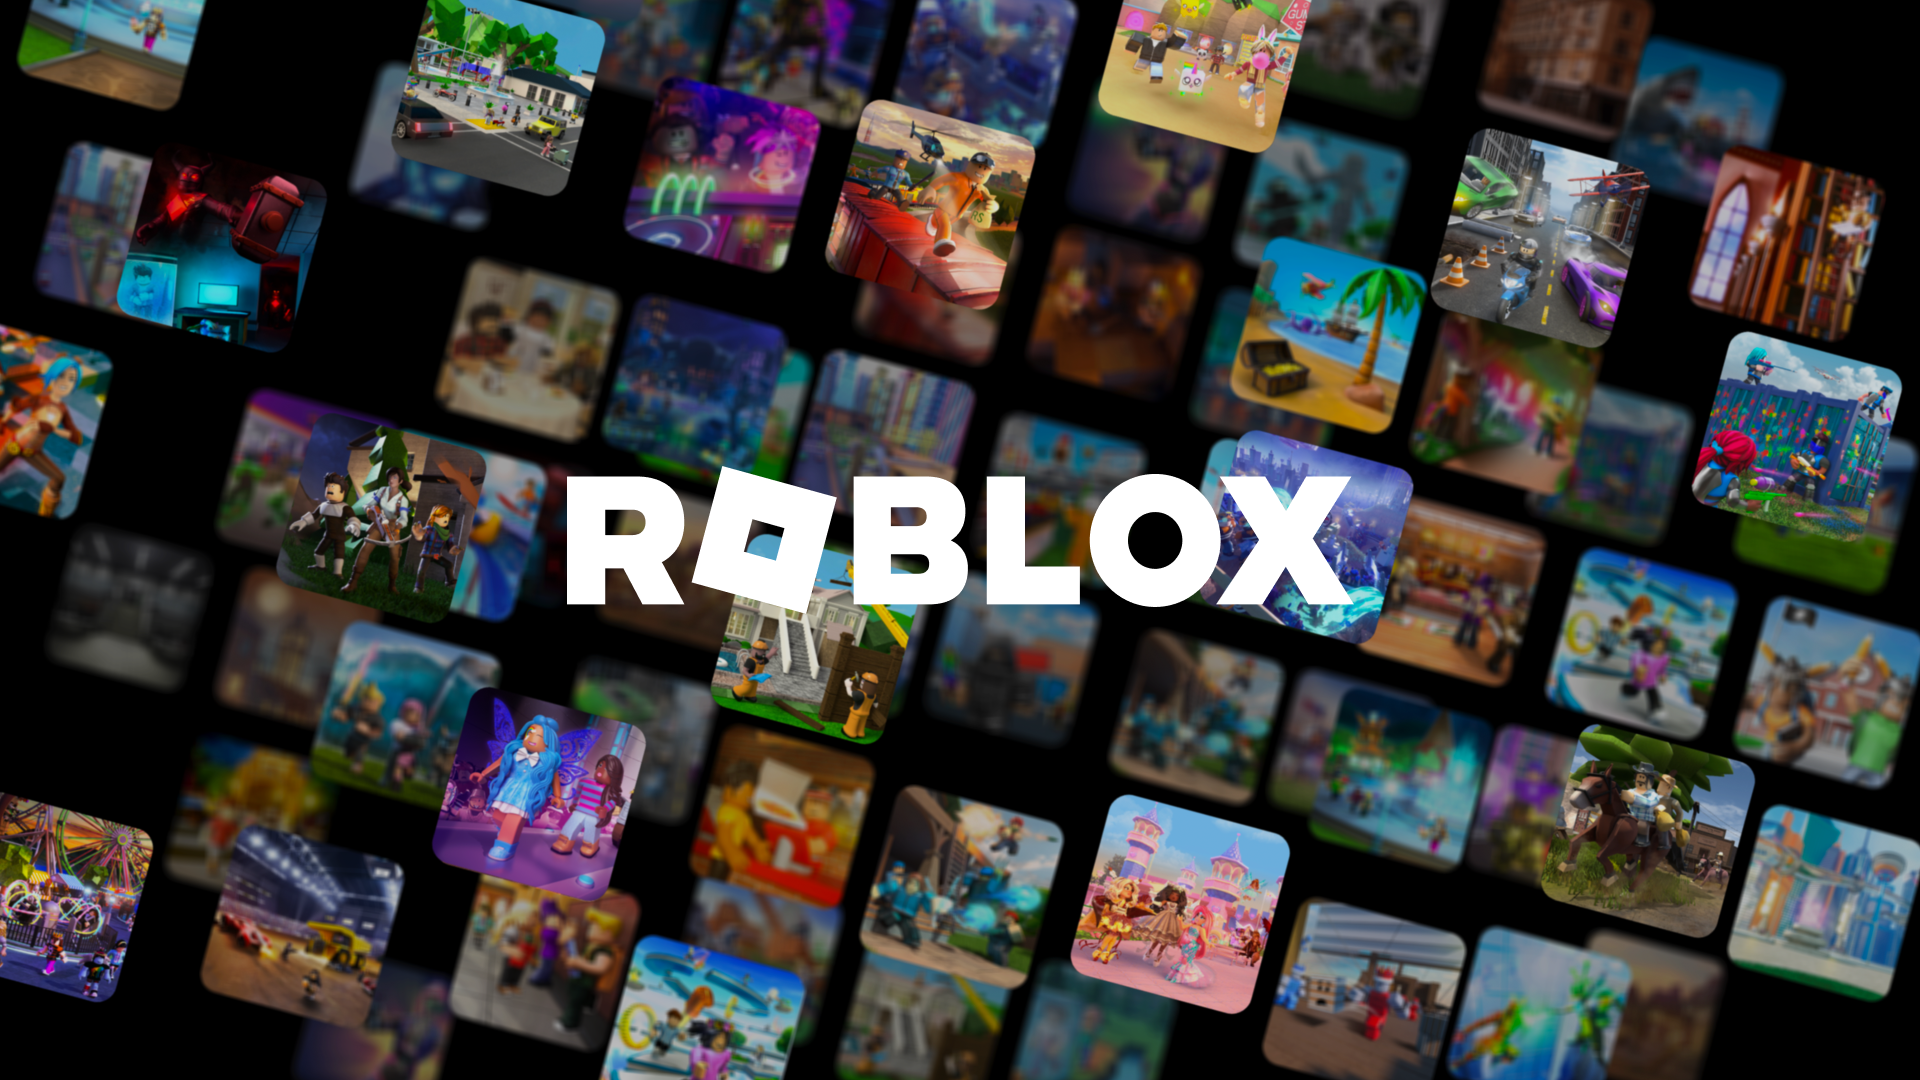 Roblox is aiming for Westworld-like ease of design with generative AI tools  - The Verge